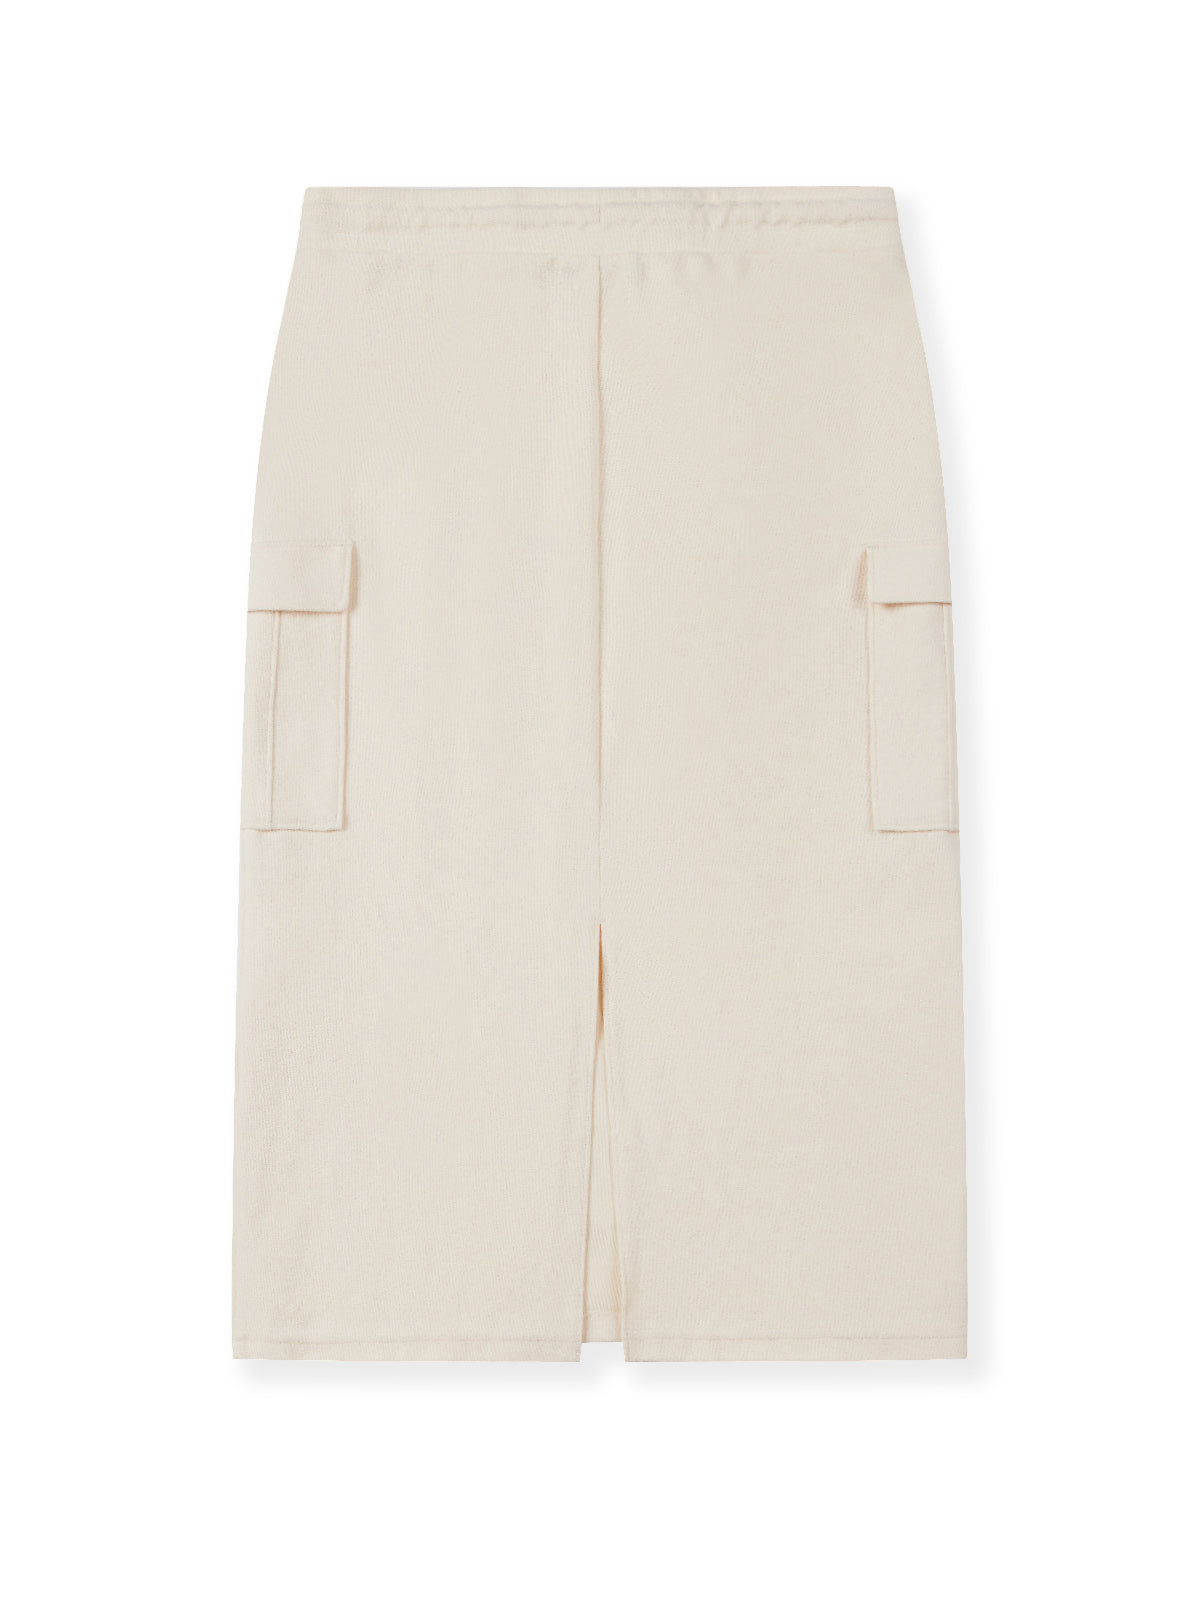 Casual Utility Skirt